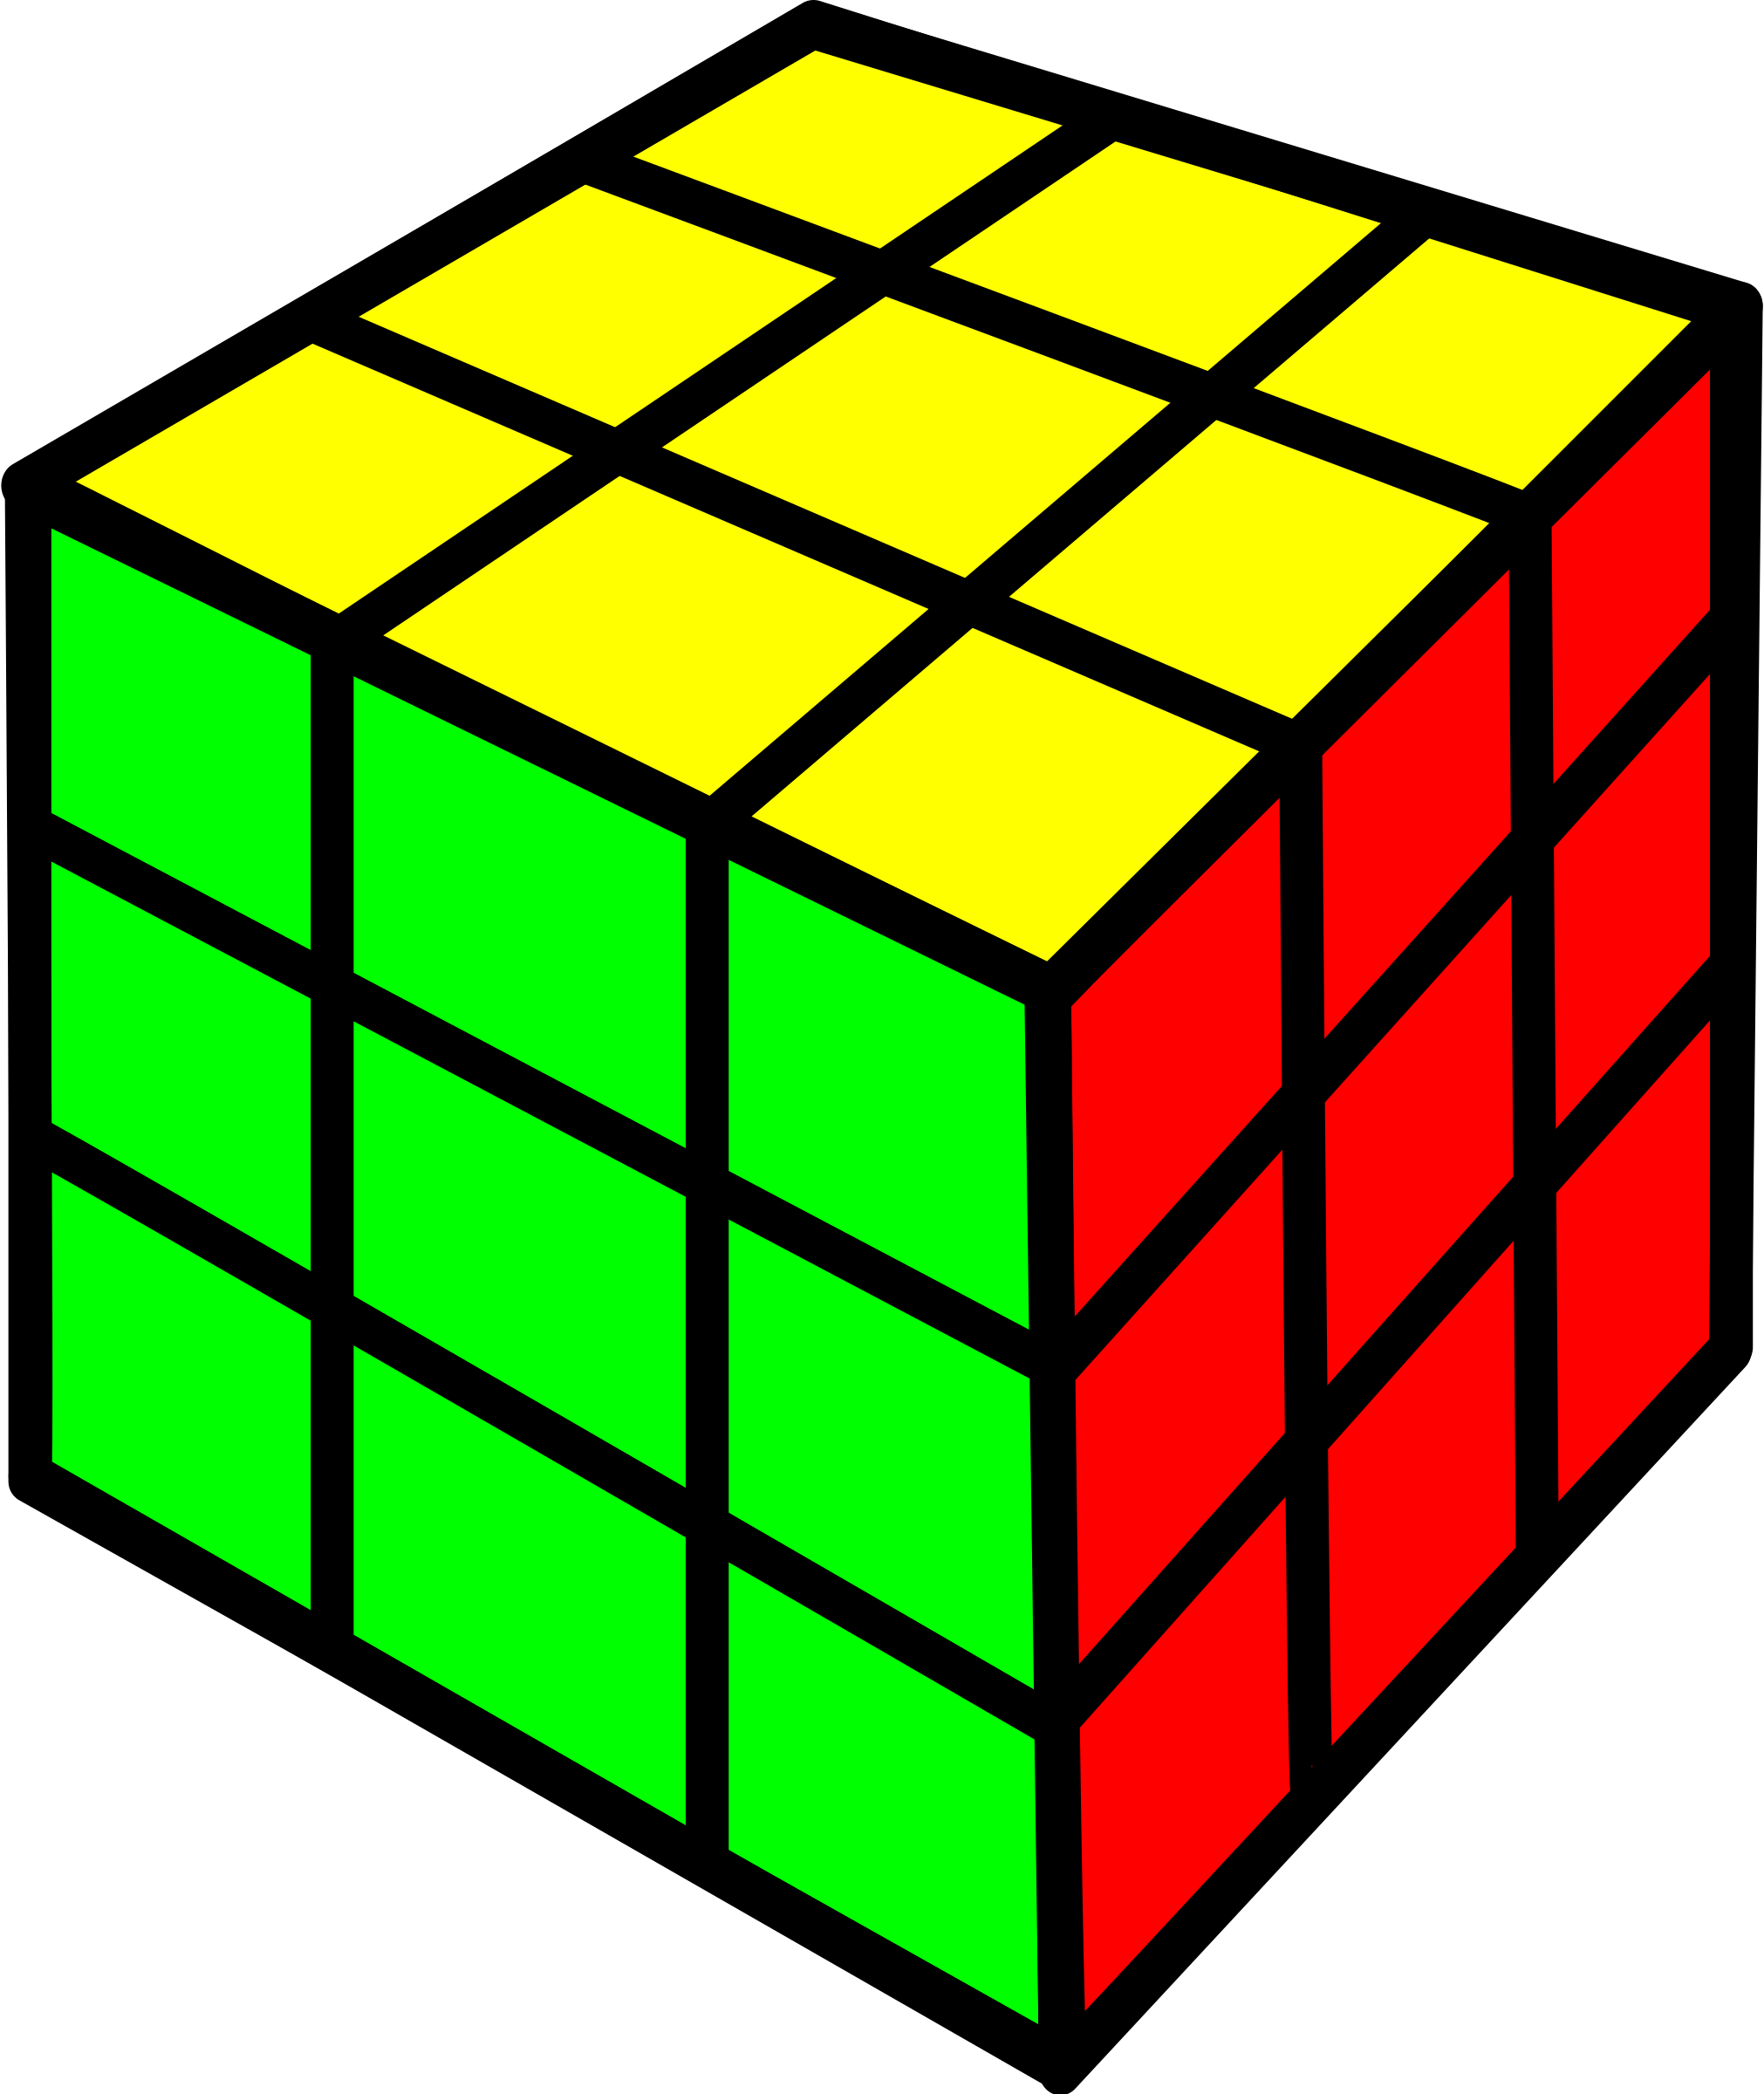 Rubik's Cube Png Image - Clip Art Of Square Objects (2022x2400)